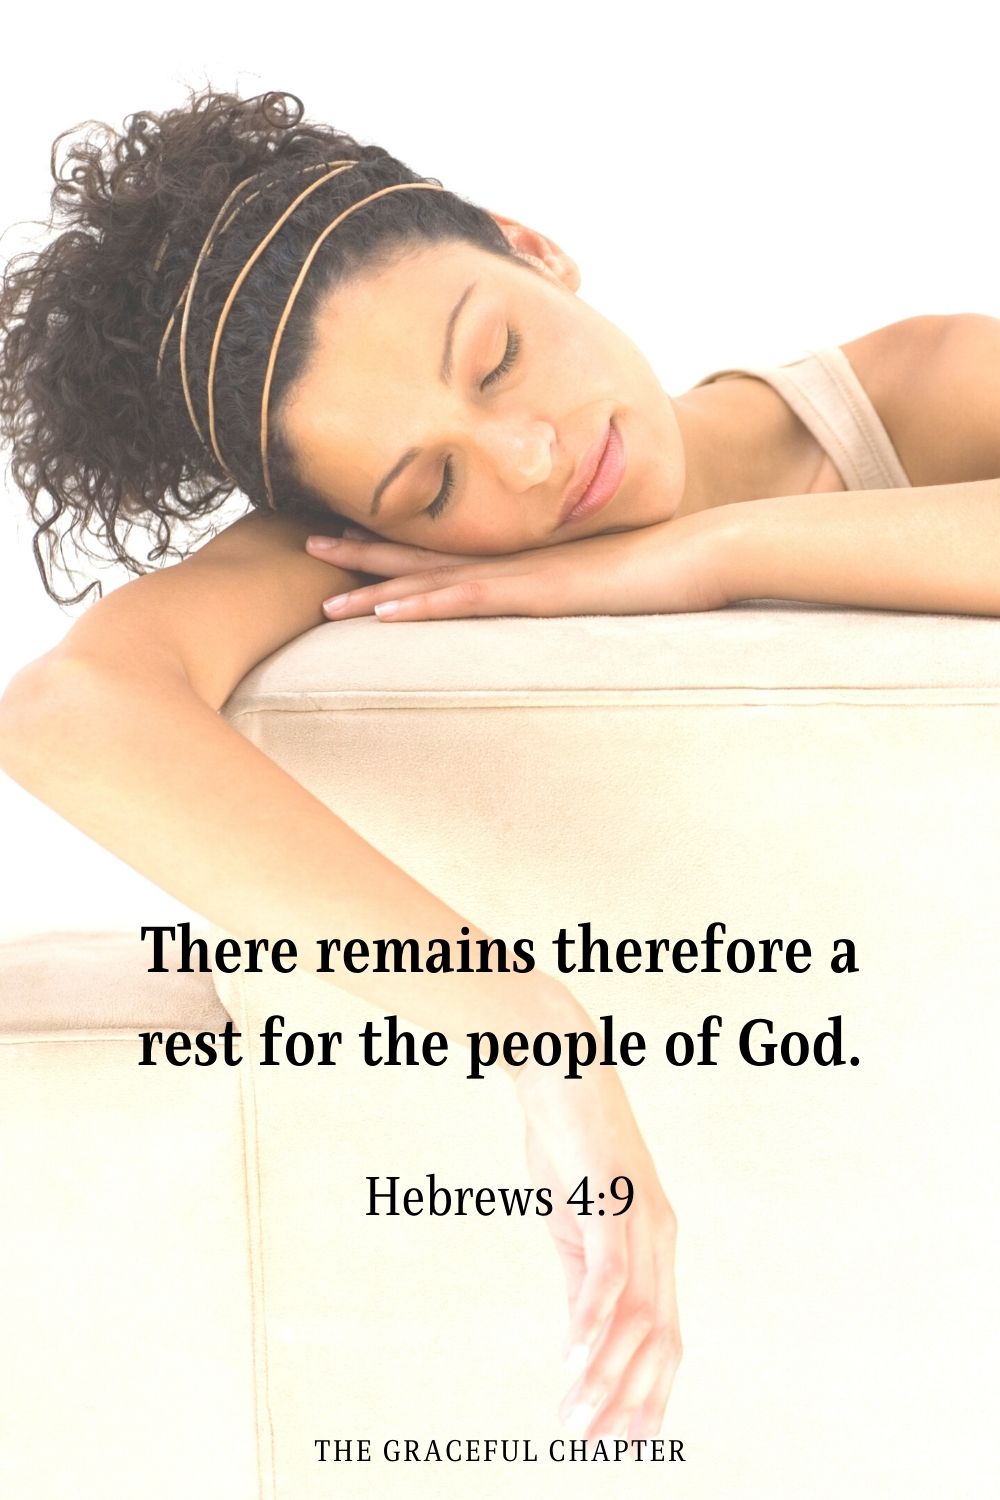 There remains therefore a rest for the people of God.